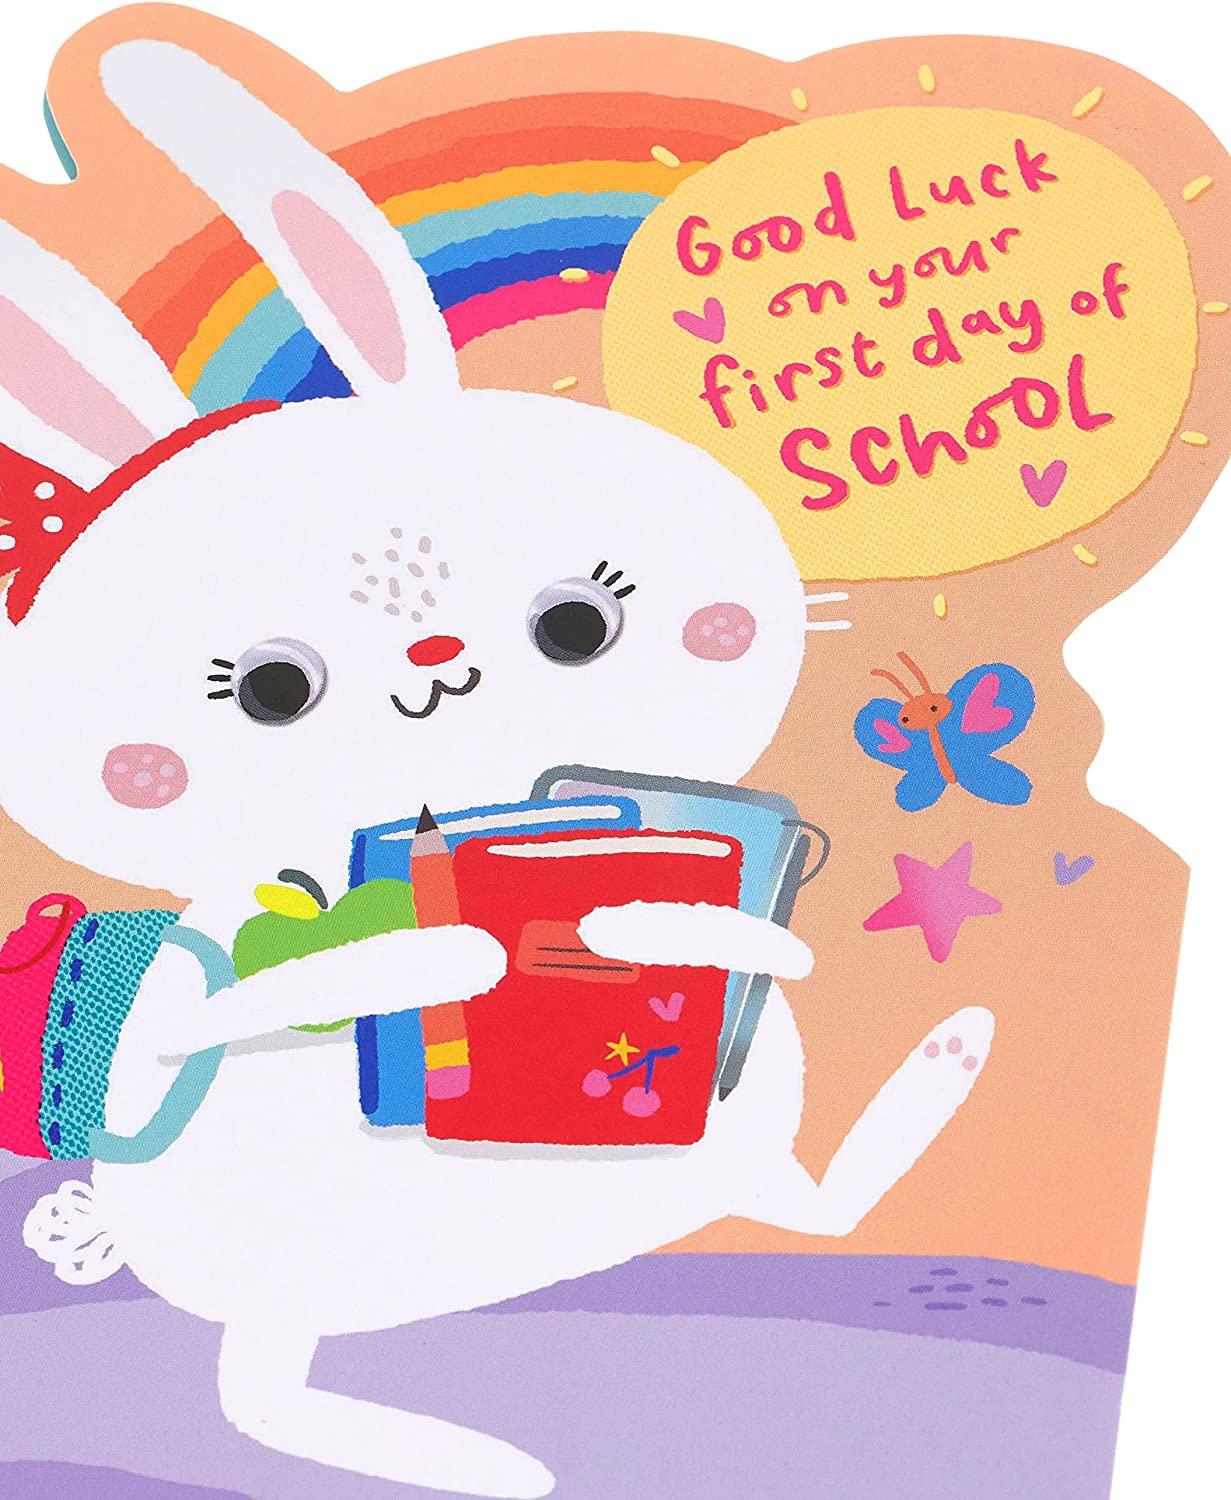 First Day At School Good Luck Card Cute Bunny Cartoon Design For Her 